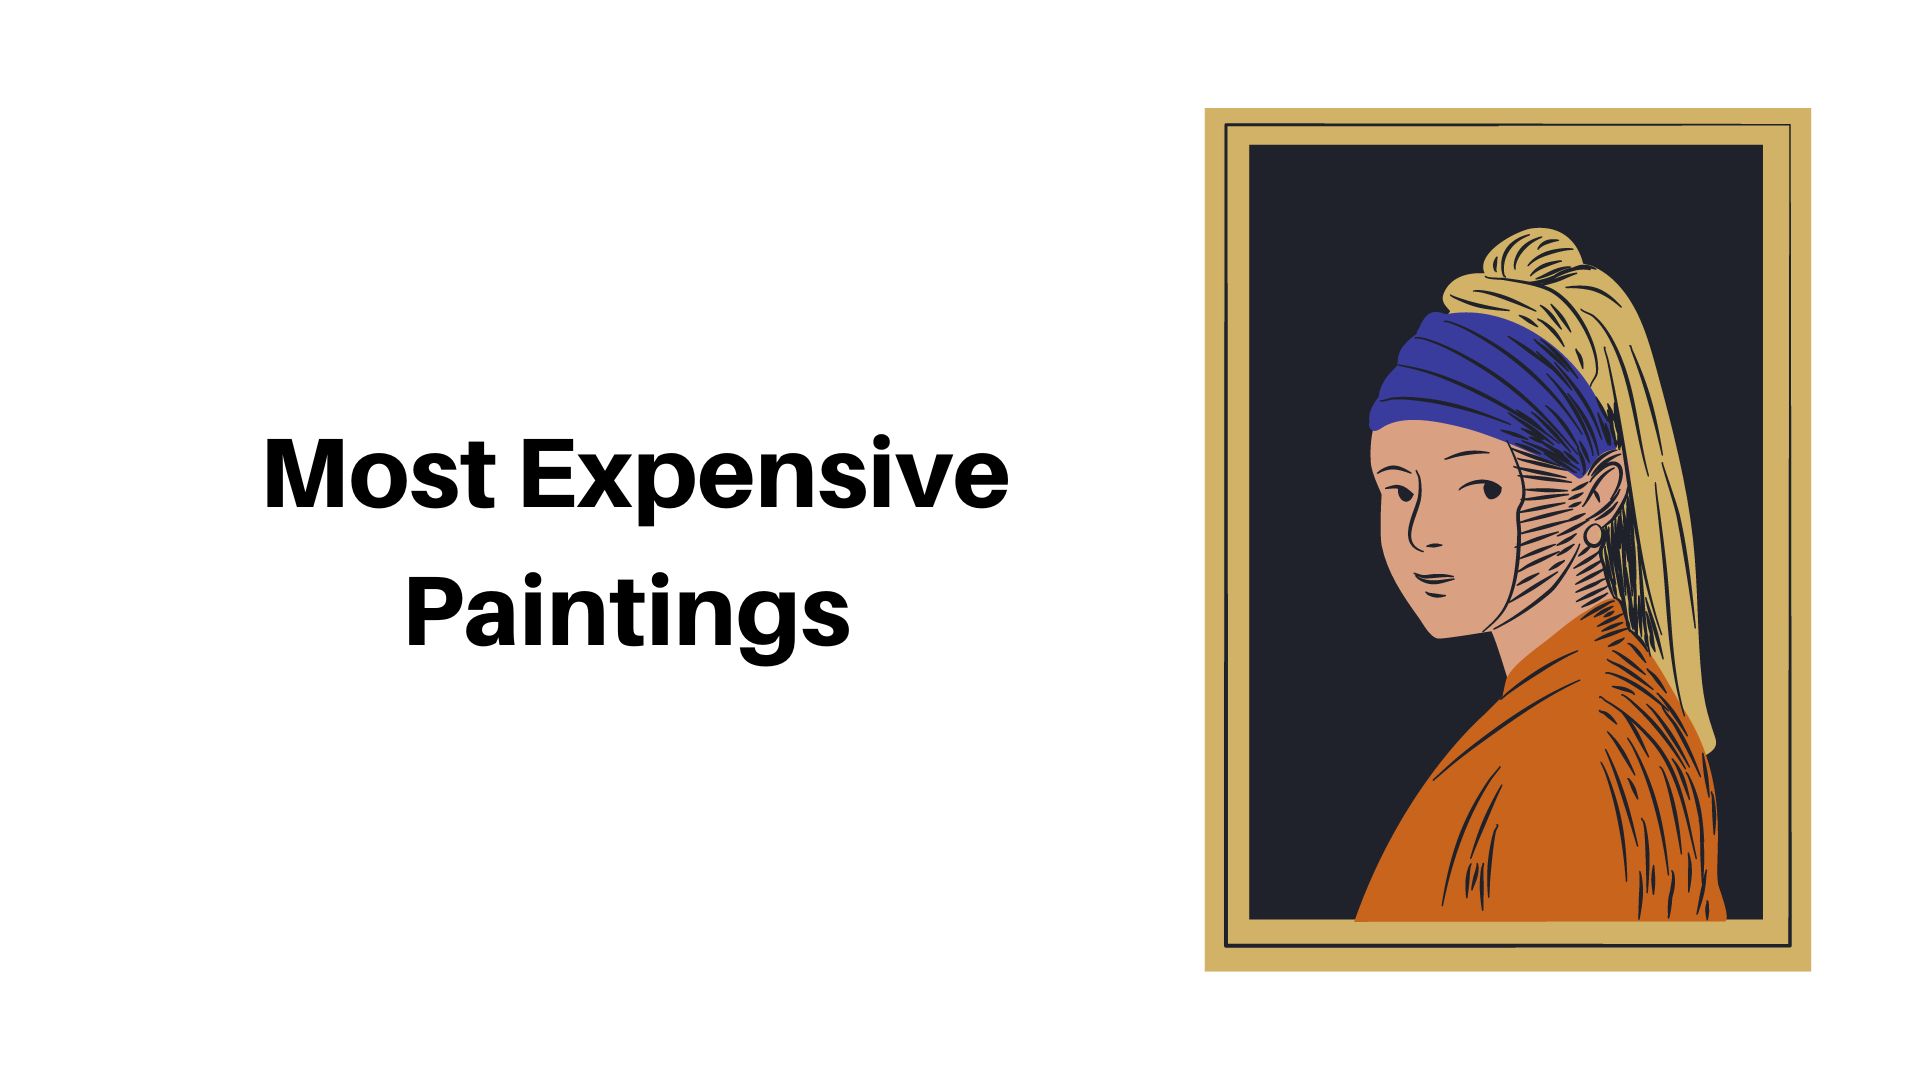 Top 10 Most Expensive Paintings In The World